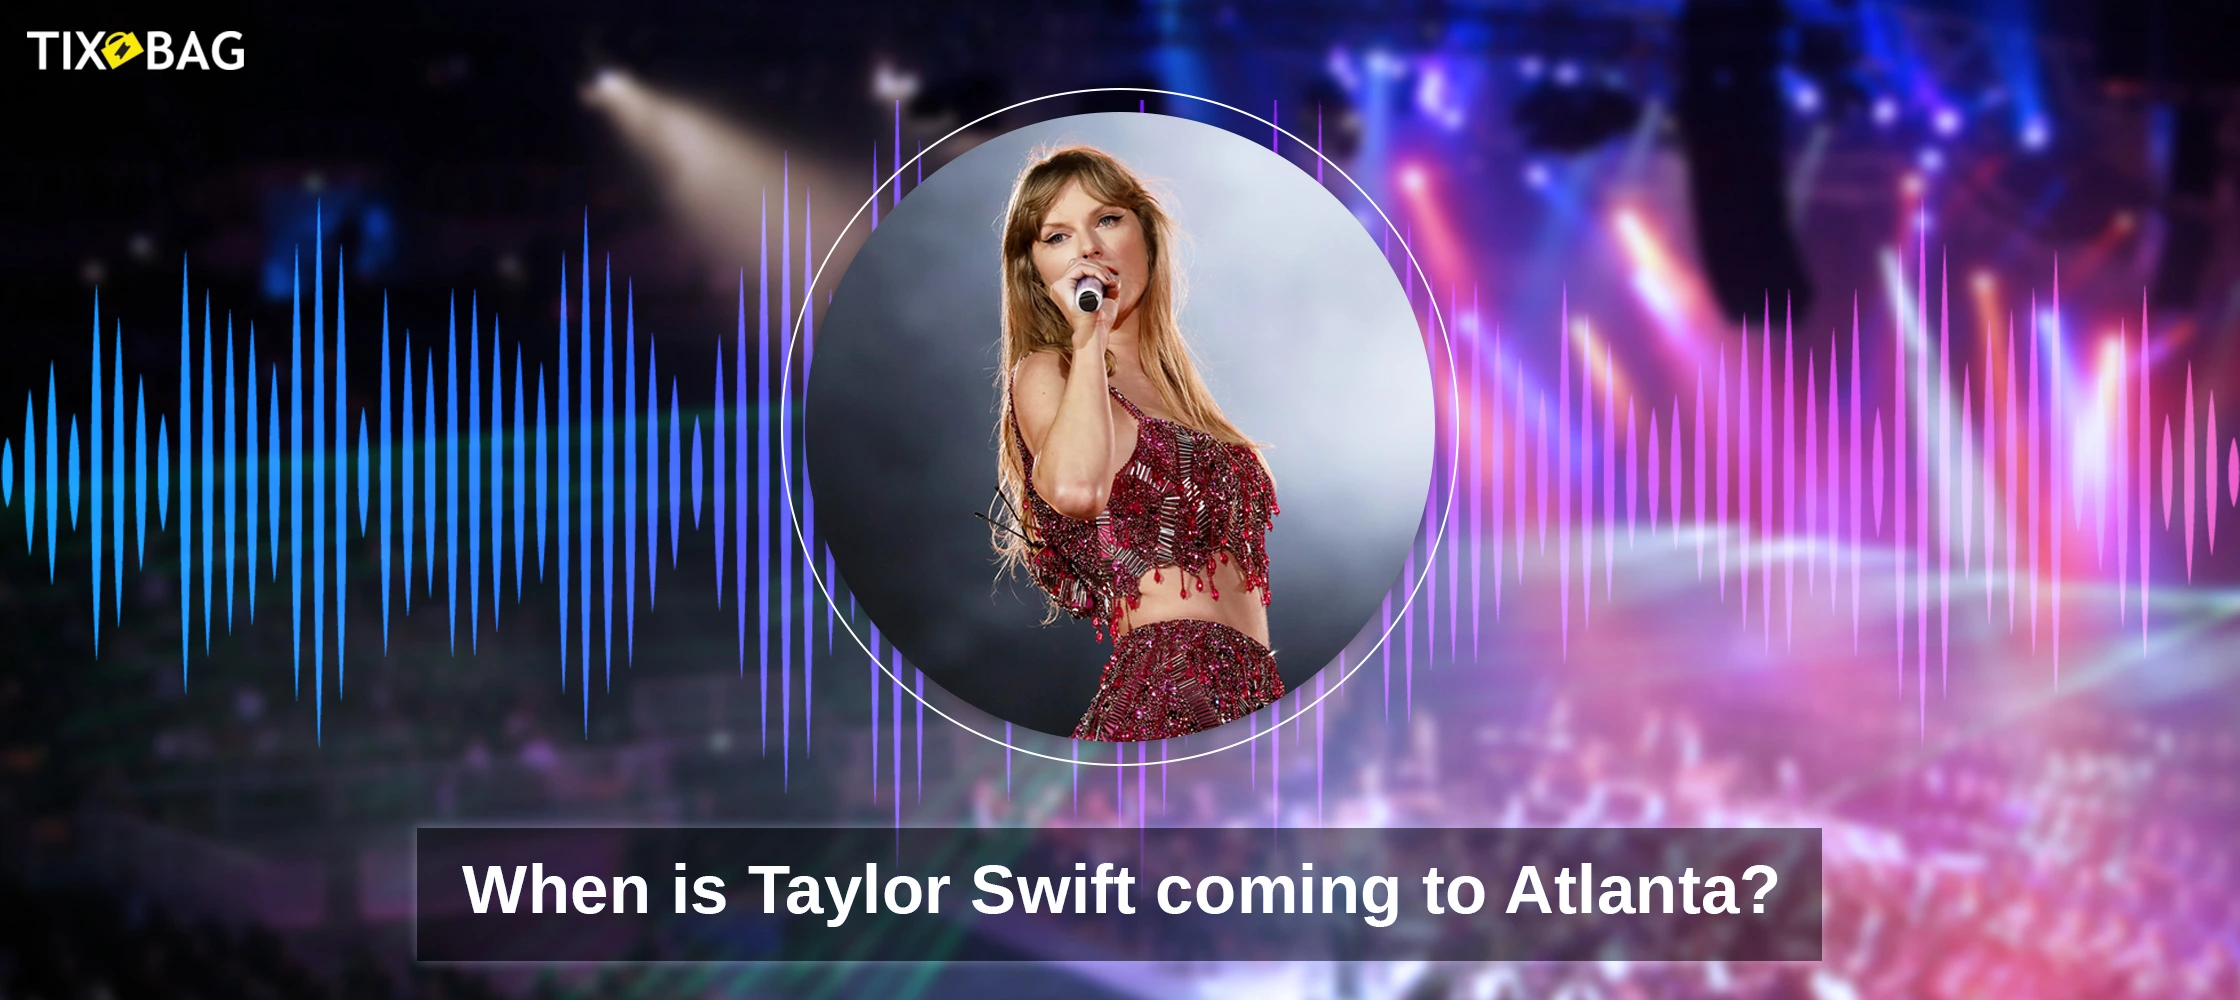 When is Taylor Swift coming to Atlanta?